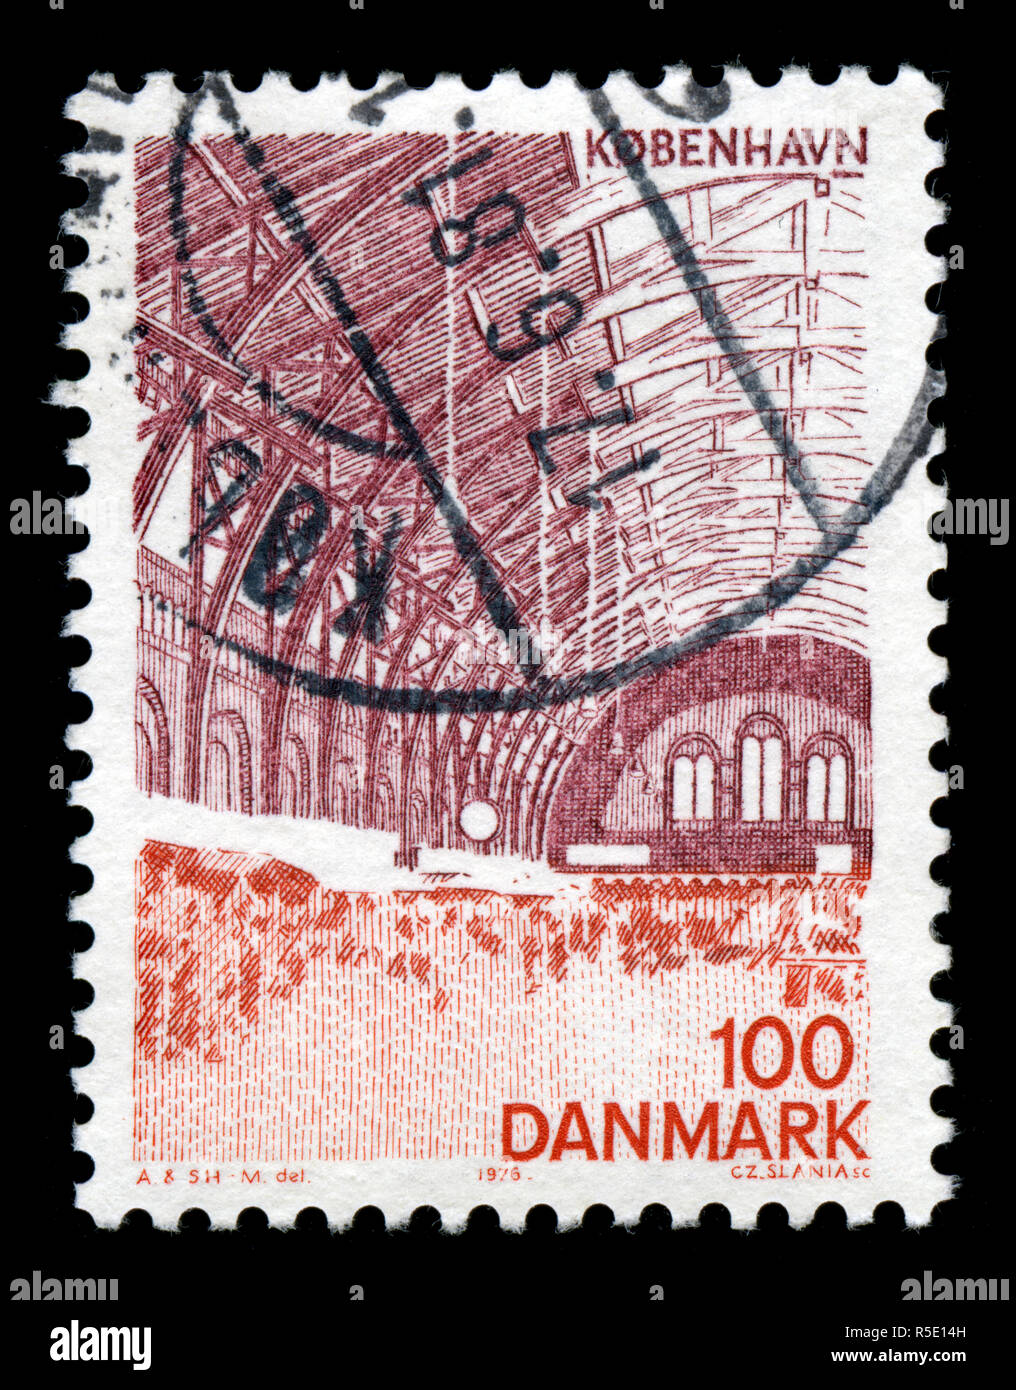 Postage stamp from Denmark in the Copenhagen views series issued in 1976 Stock Photo